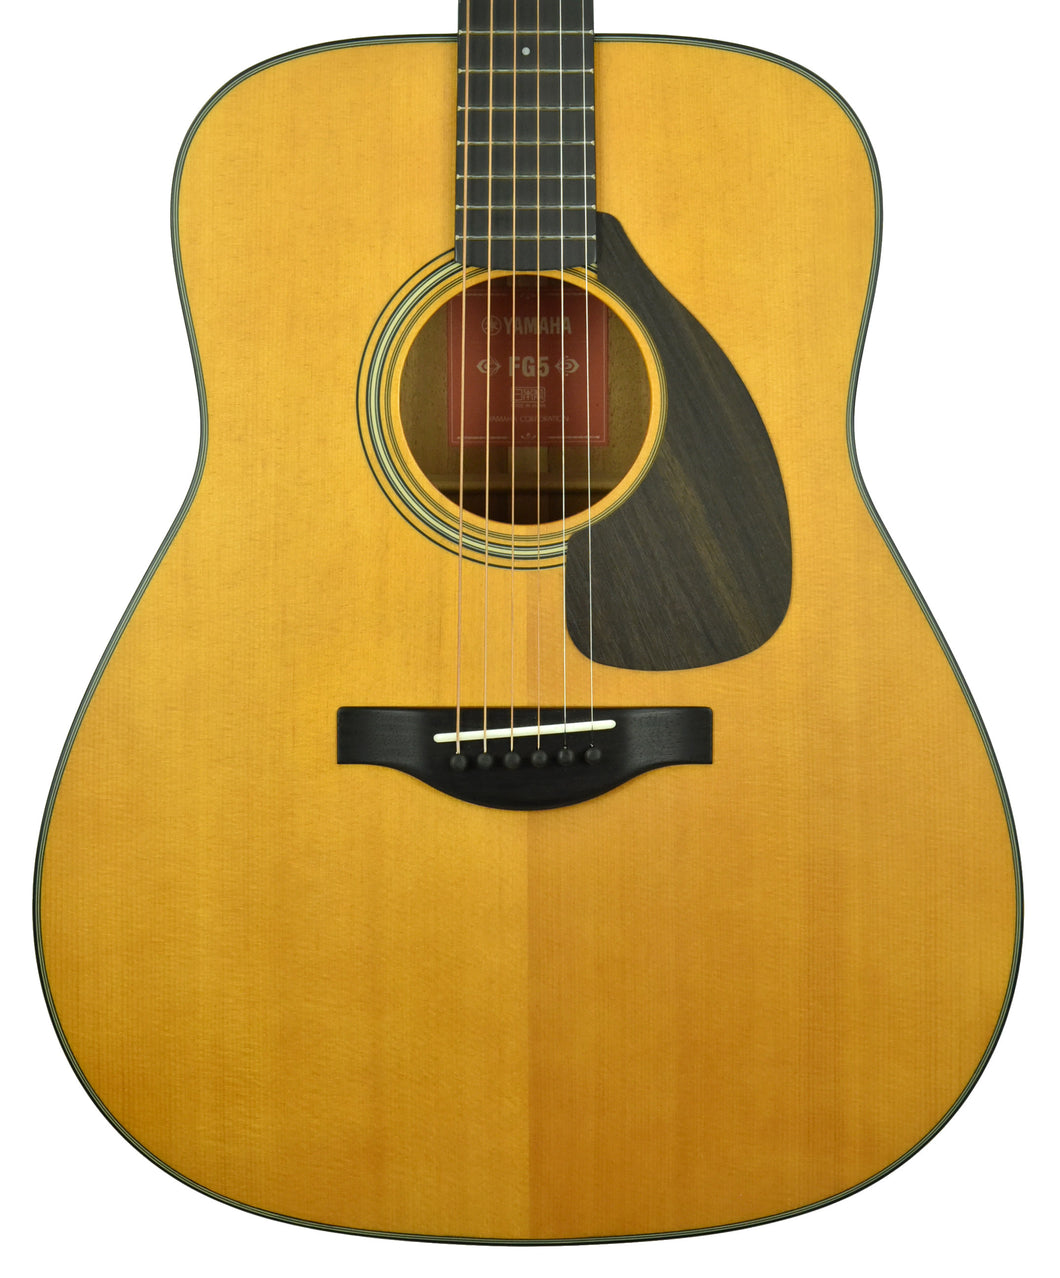 Used Yamaha FG5 Red Label Acoustic Guitar in Natural HPM727A - The Music Gallery